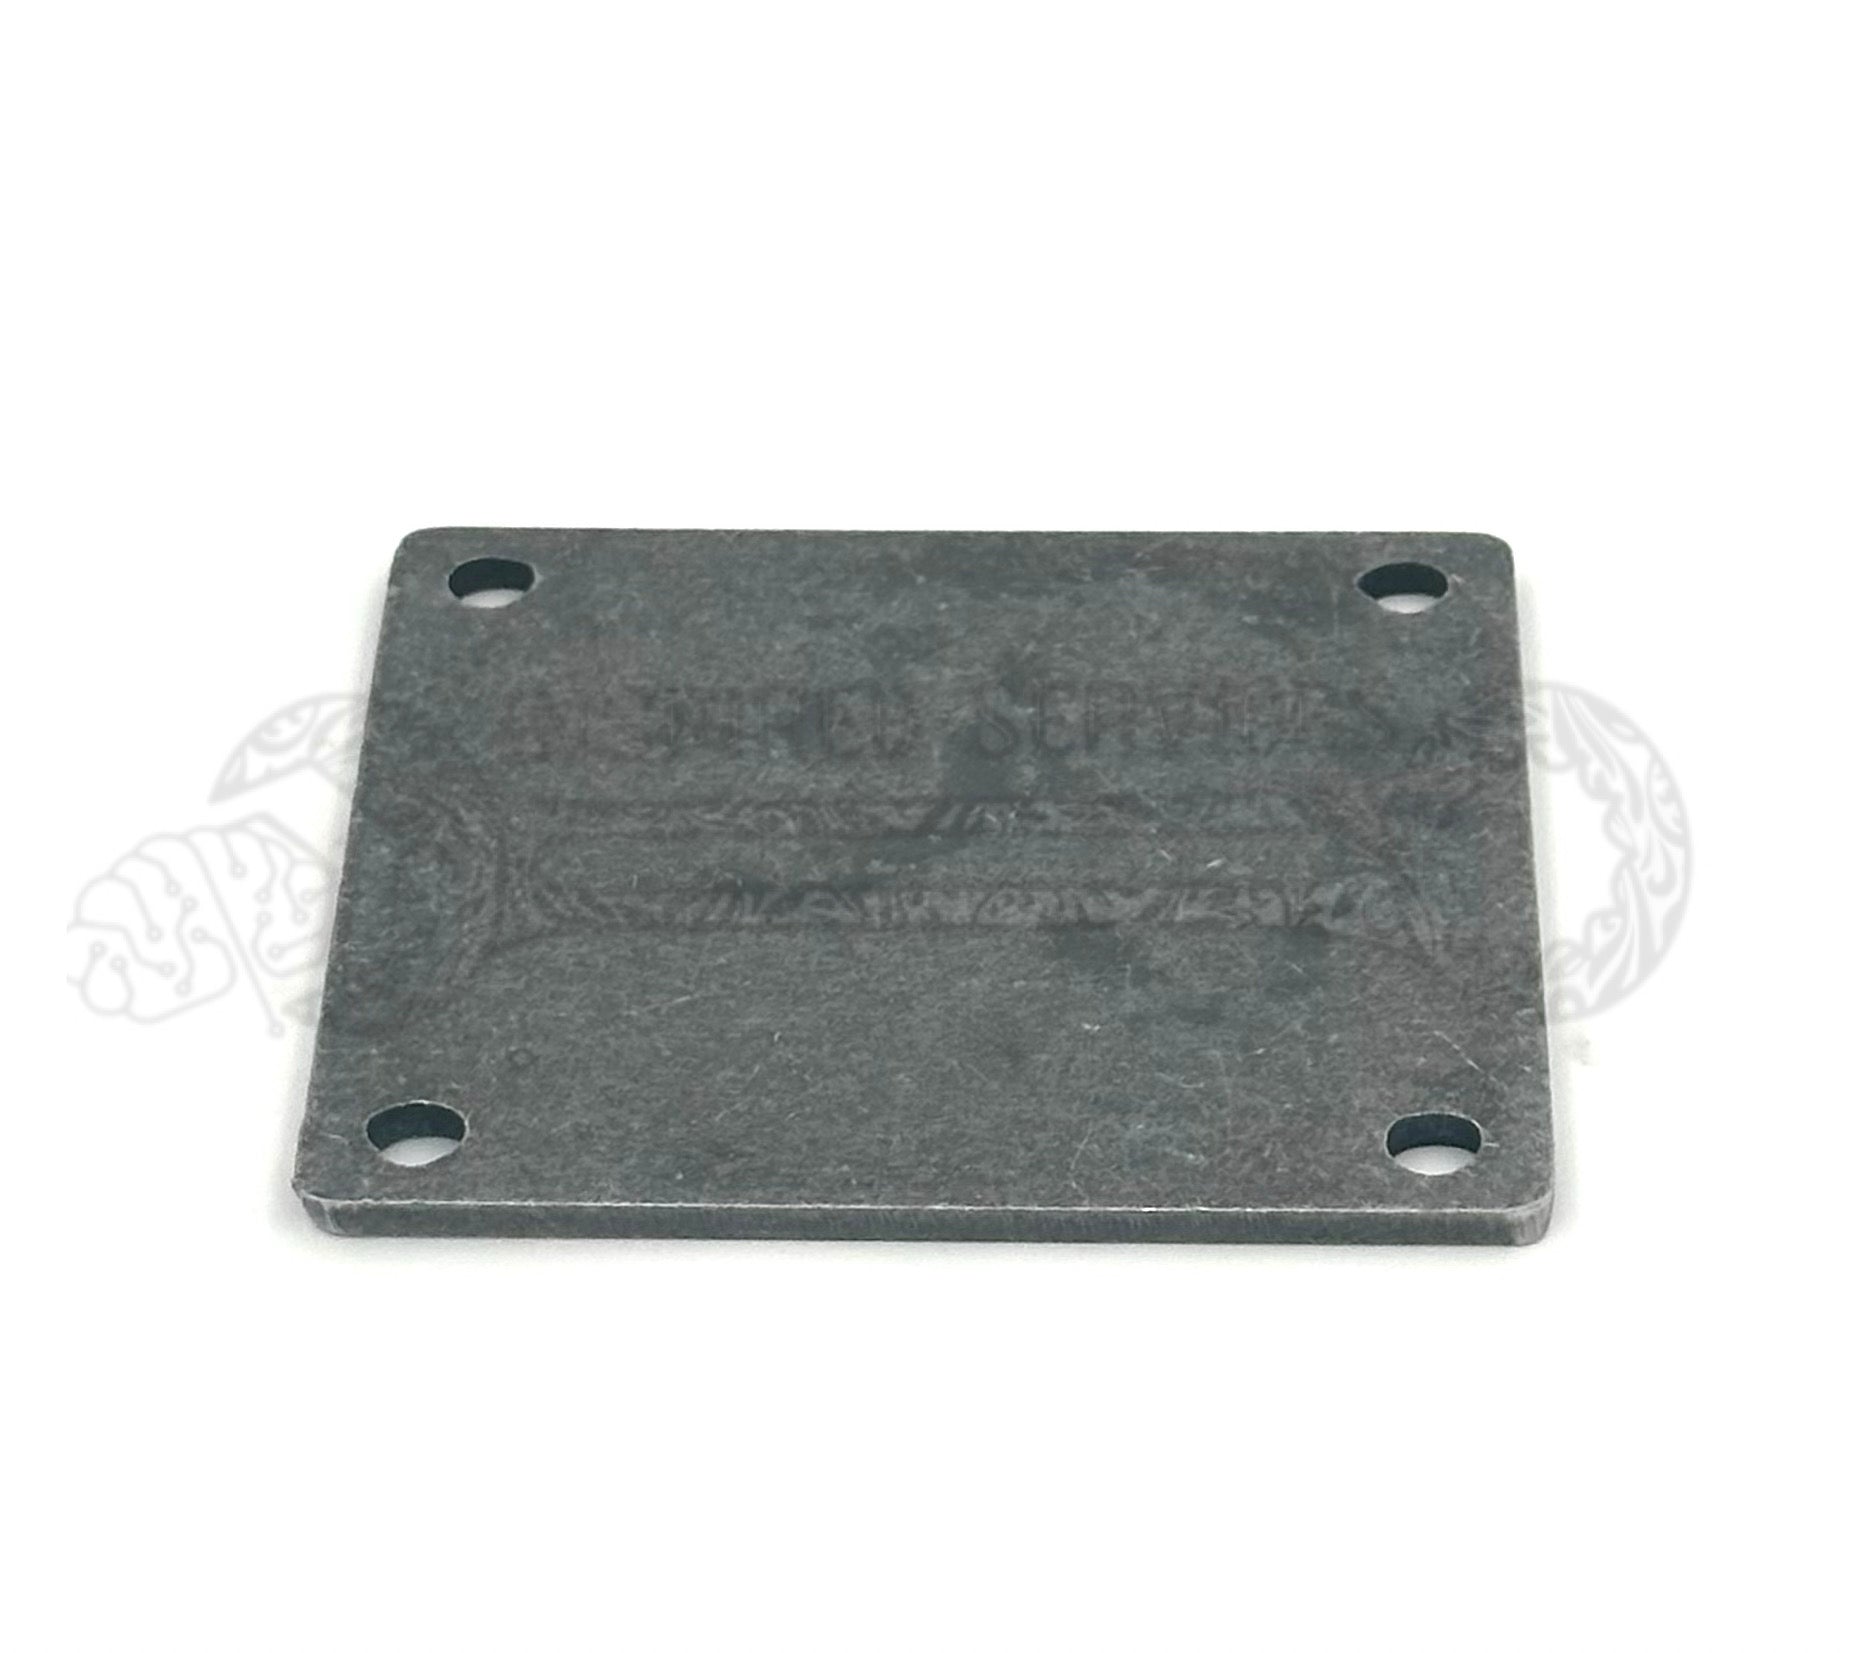 Steel Metal Base Plate for welding various types of rails